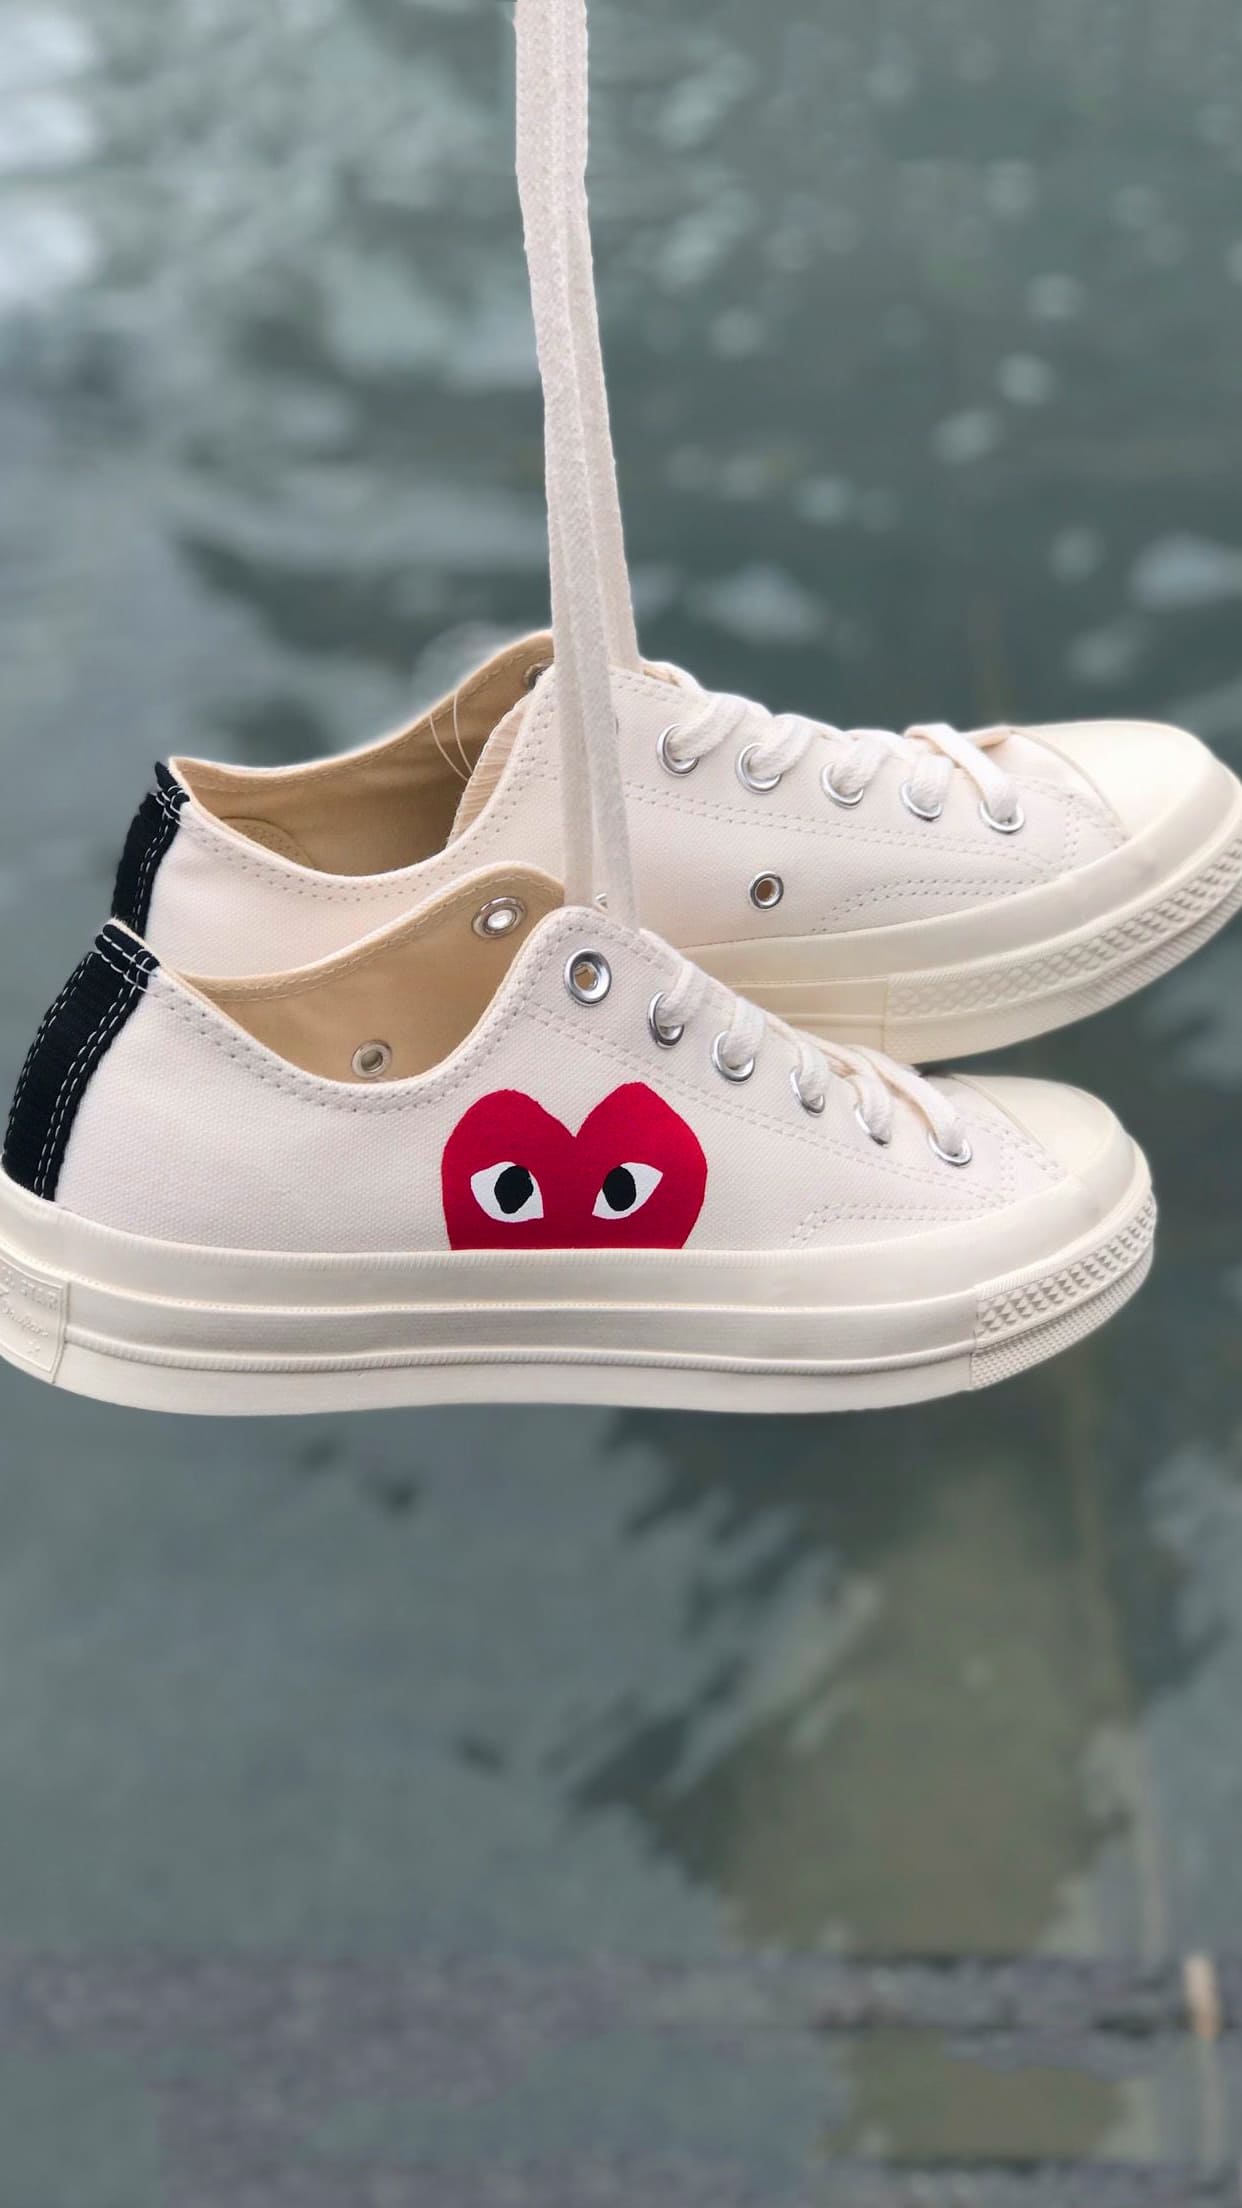 A pair of white sneakers with a red heart on them. - Converse